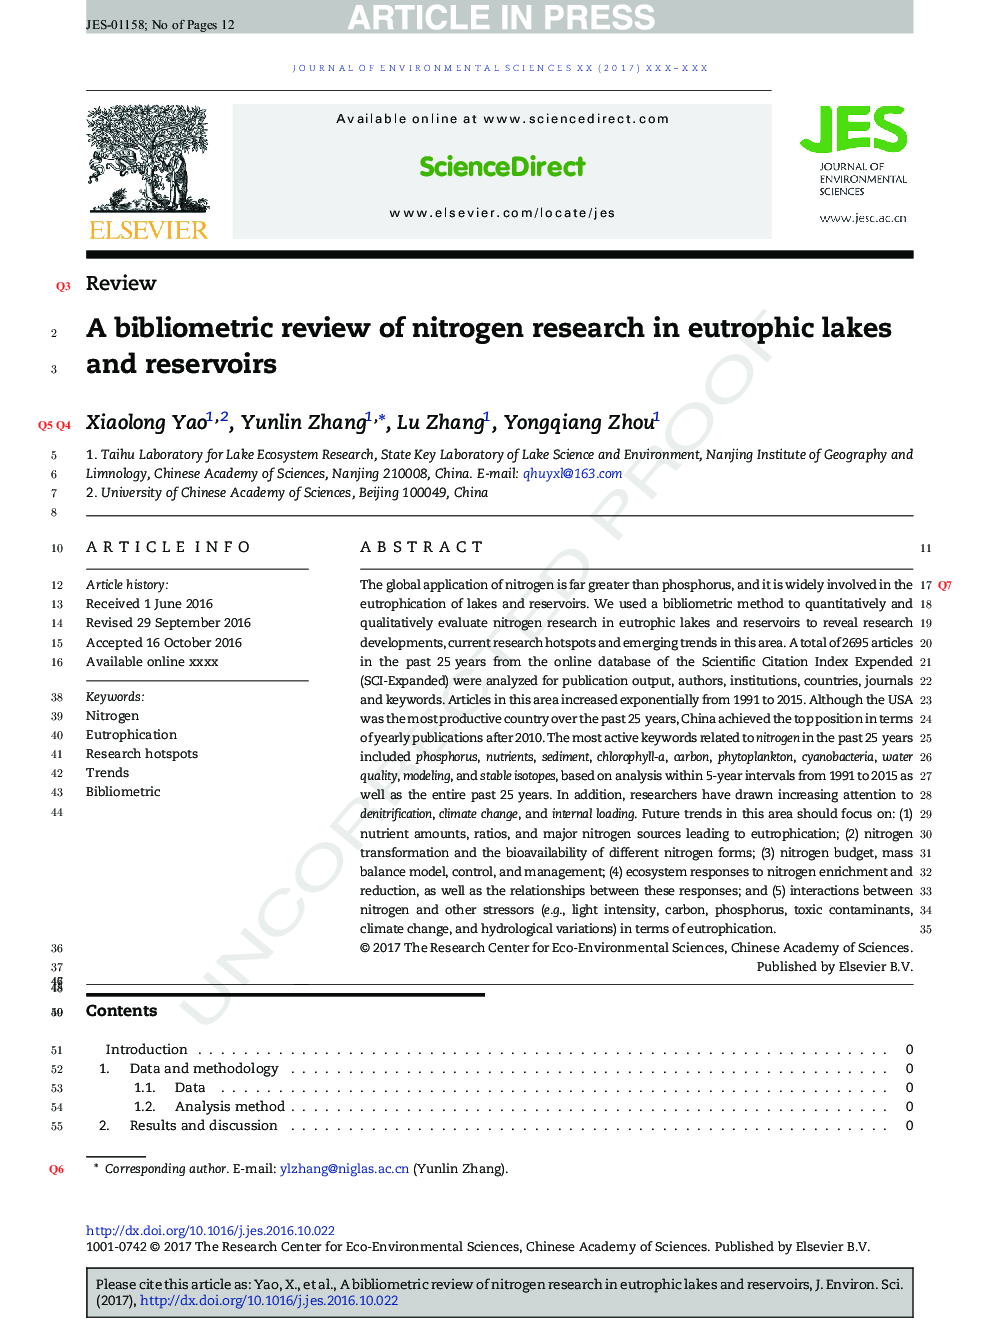 A bibliometric review of nitrogen research in eutrophic lakes and reservoirs